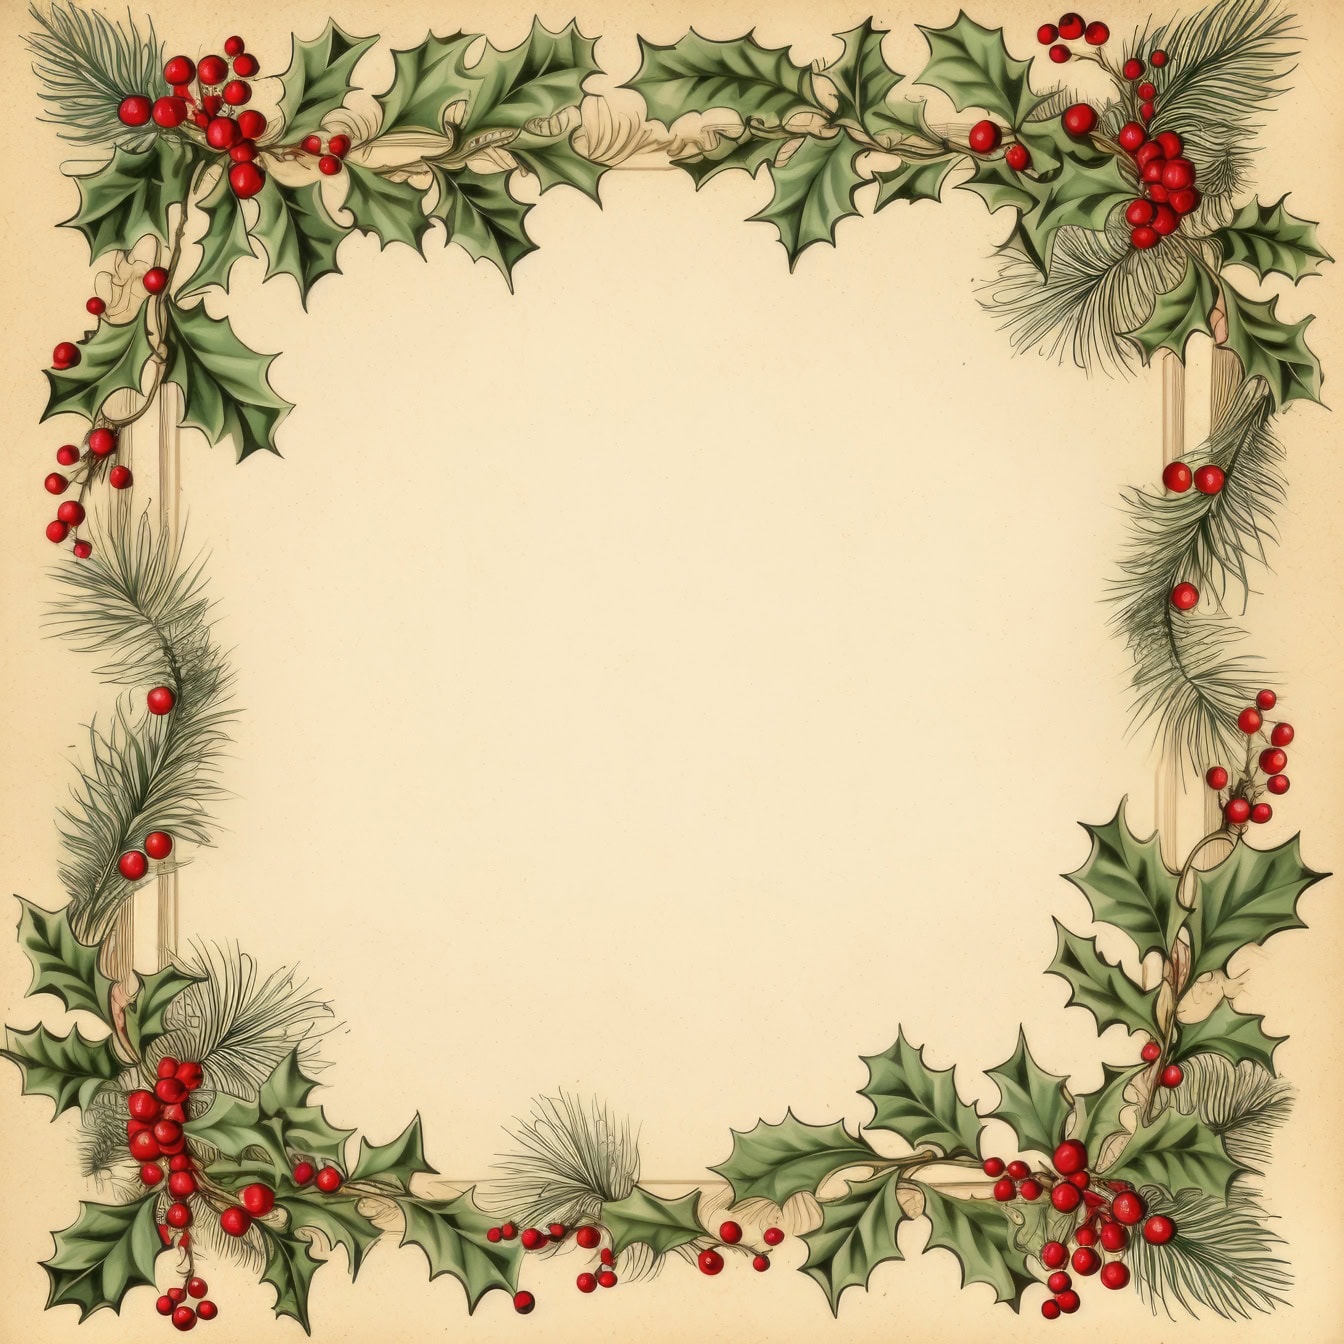 Christmas card with frame of holly wreath and berries, a perfect holiday greeting card template